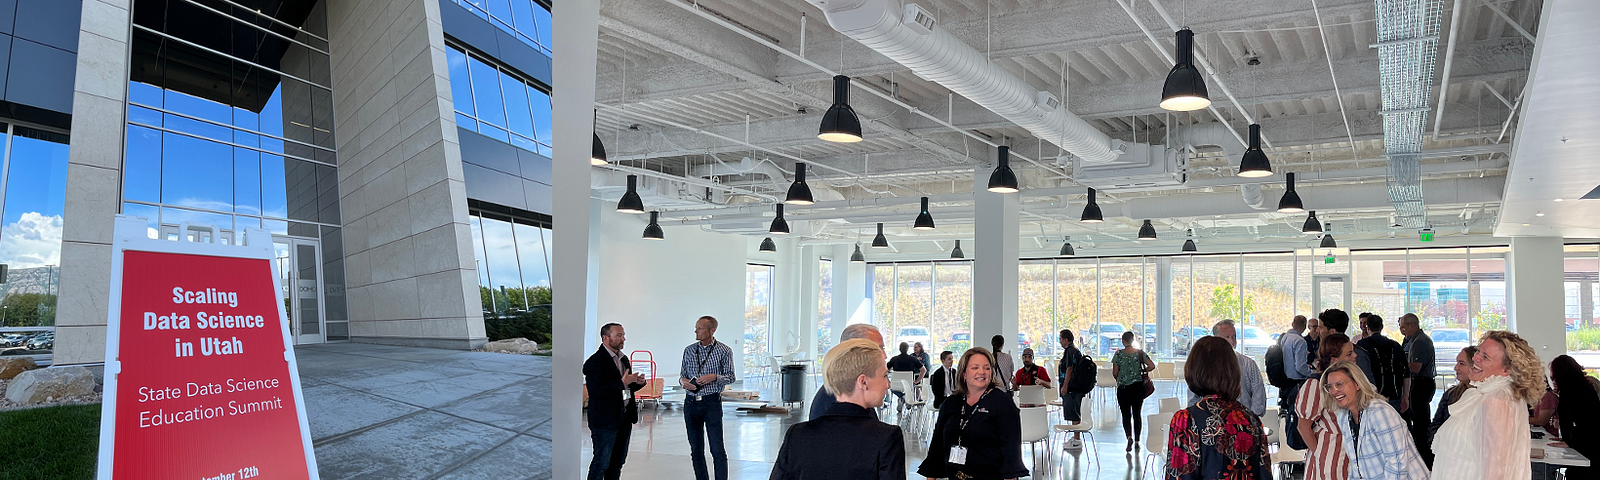 Hosted at Domo’s new headquarters in American Fork, UT, “Scaling Data Science in Utah” brought together nearly 100 industry, policy, K-12 and higher-education leaders to discuss the future of data science, math, CS, and technology education.